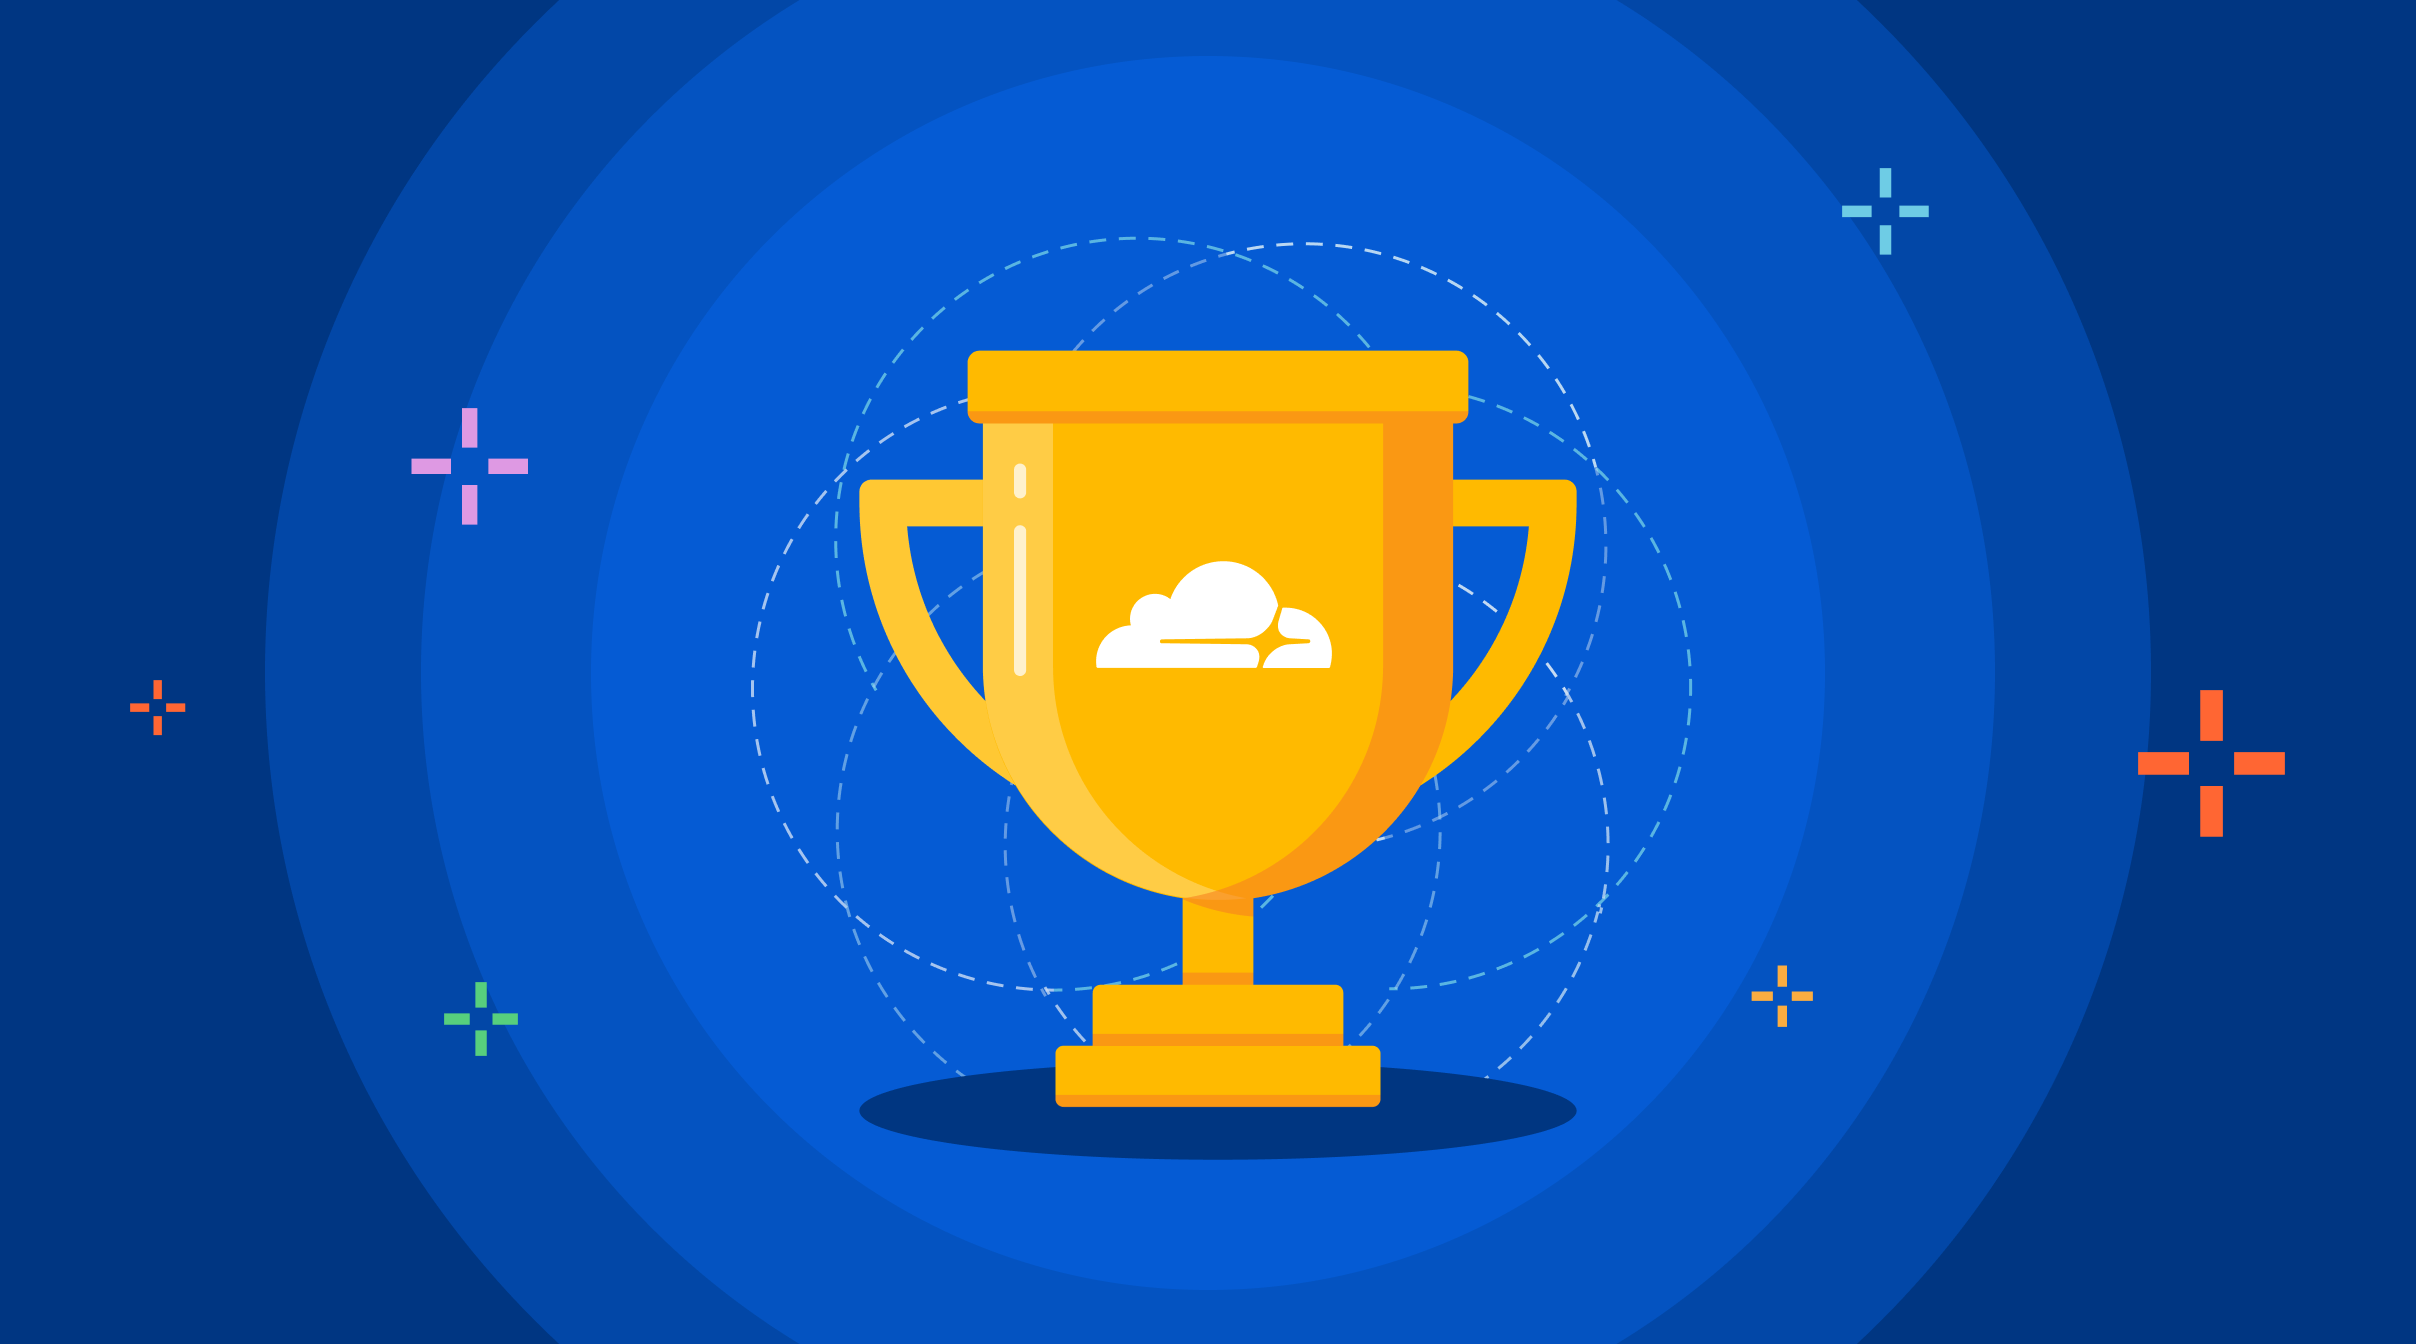 Cloudflare One Week 2022 - Cloudflare won Security Software Innovator Award